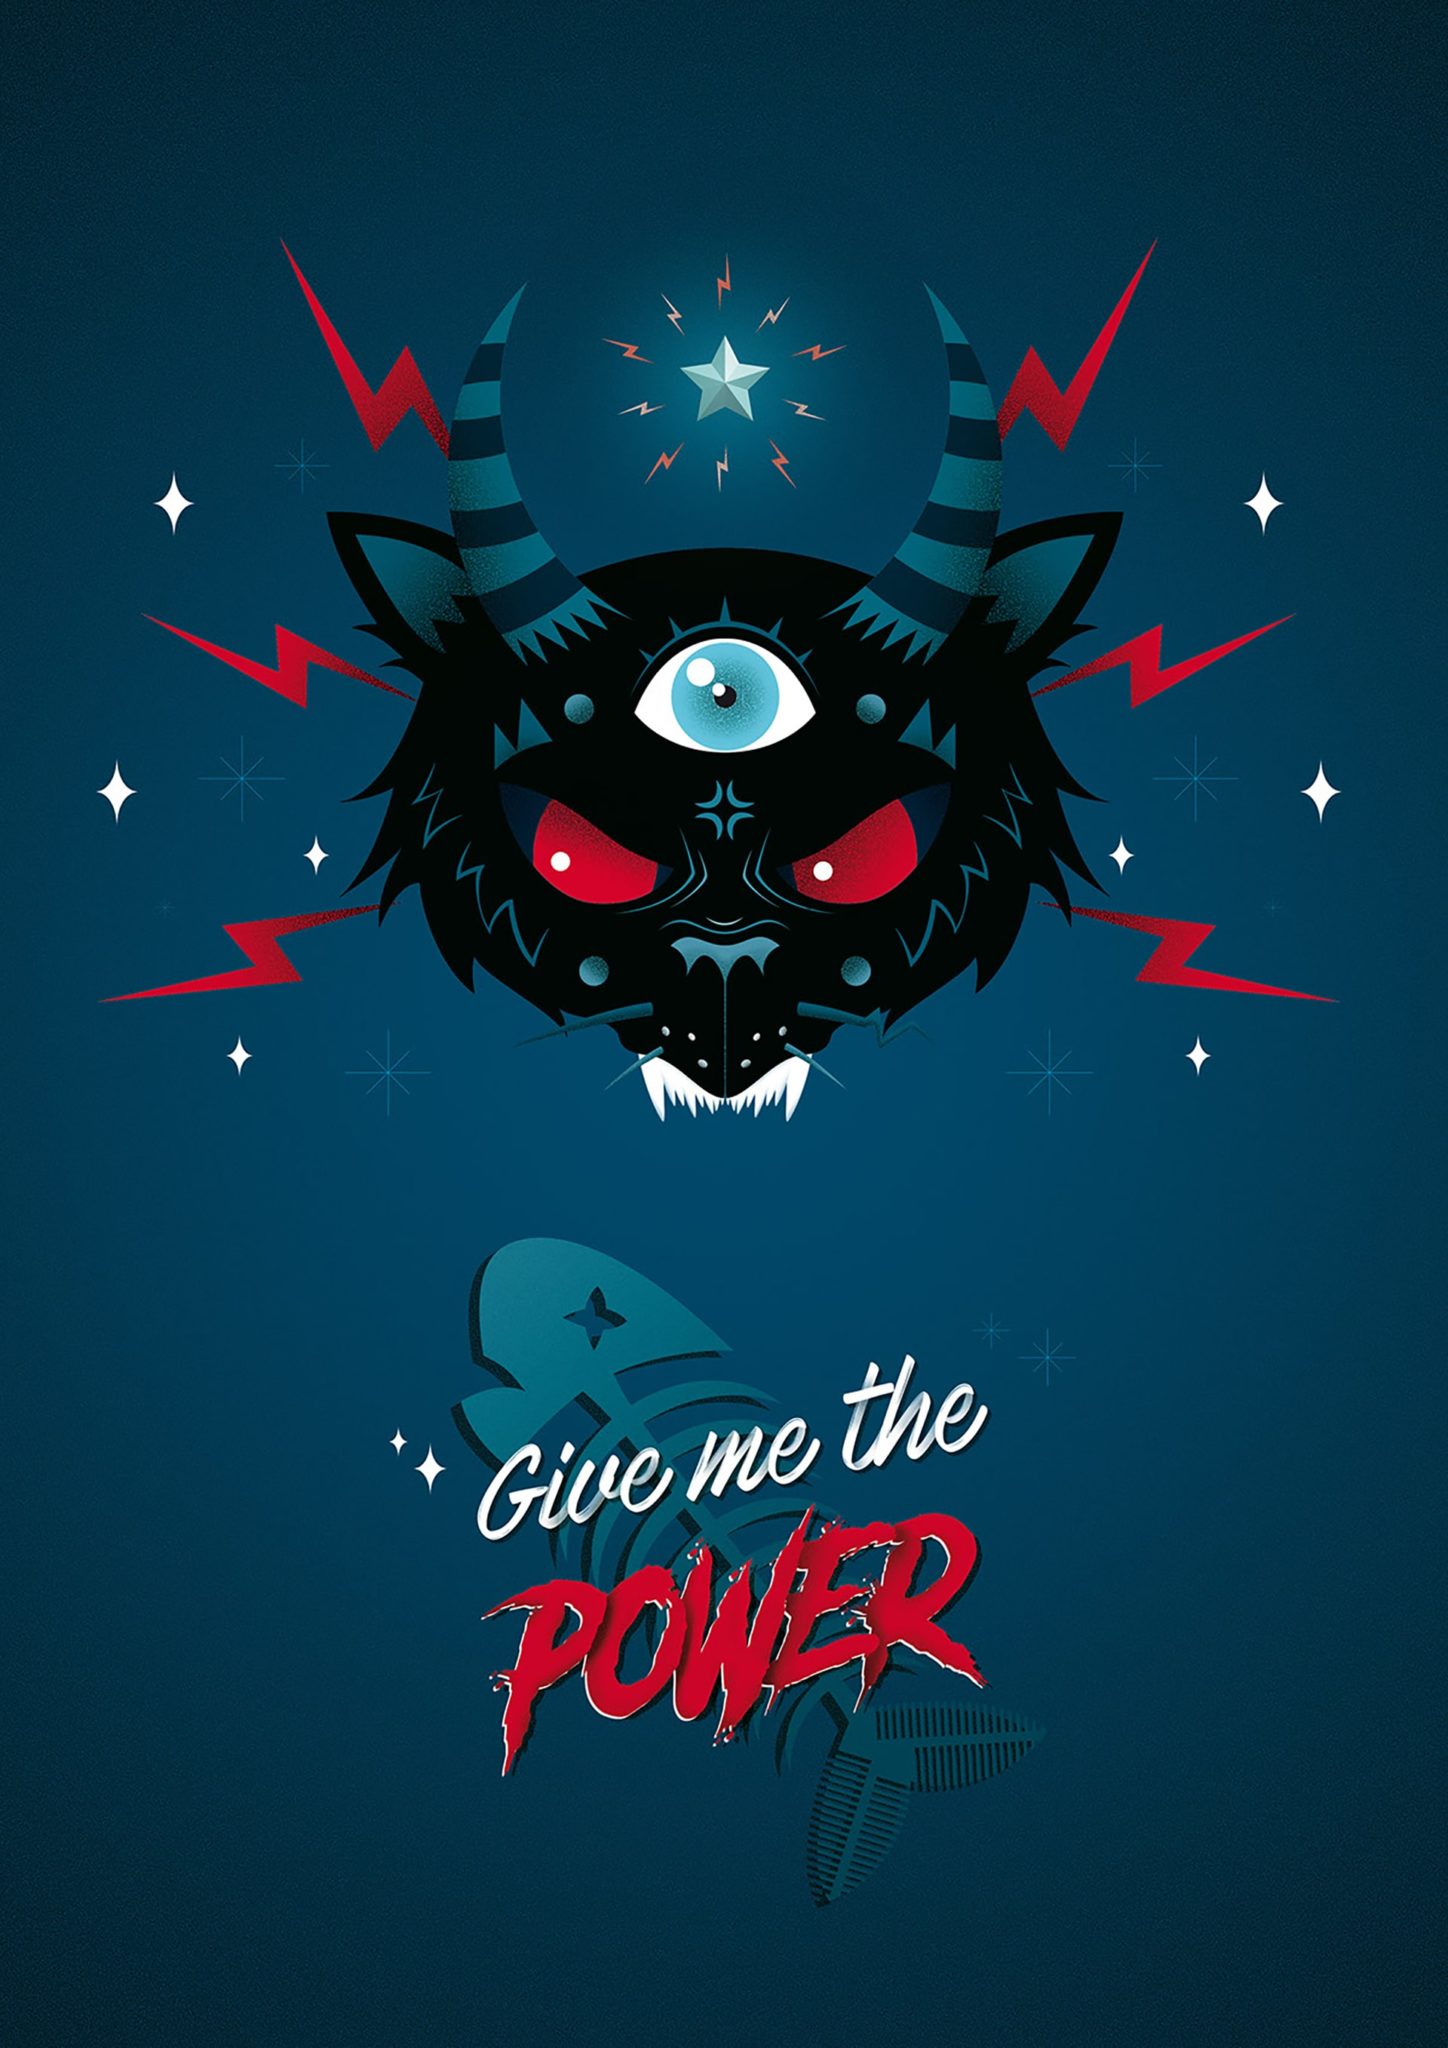 Give me the power